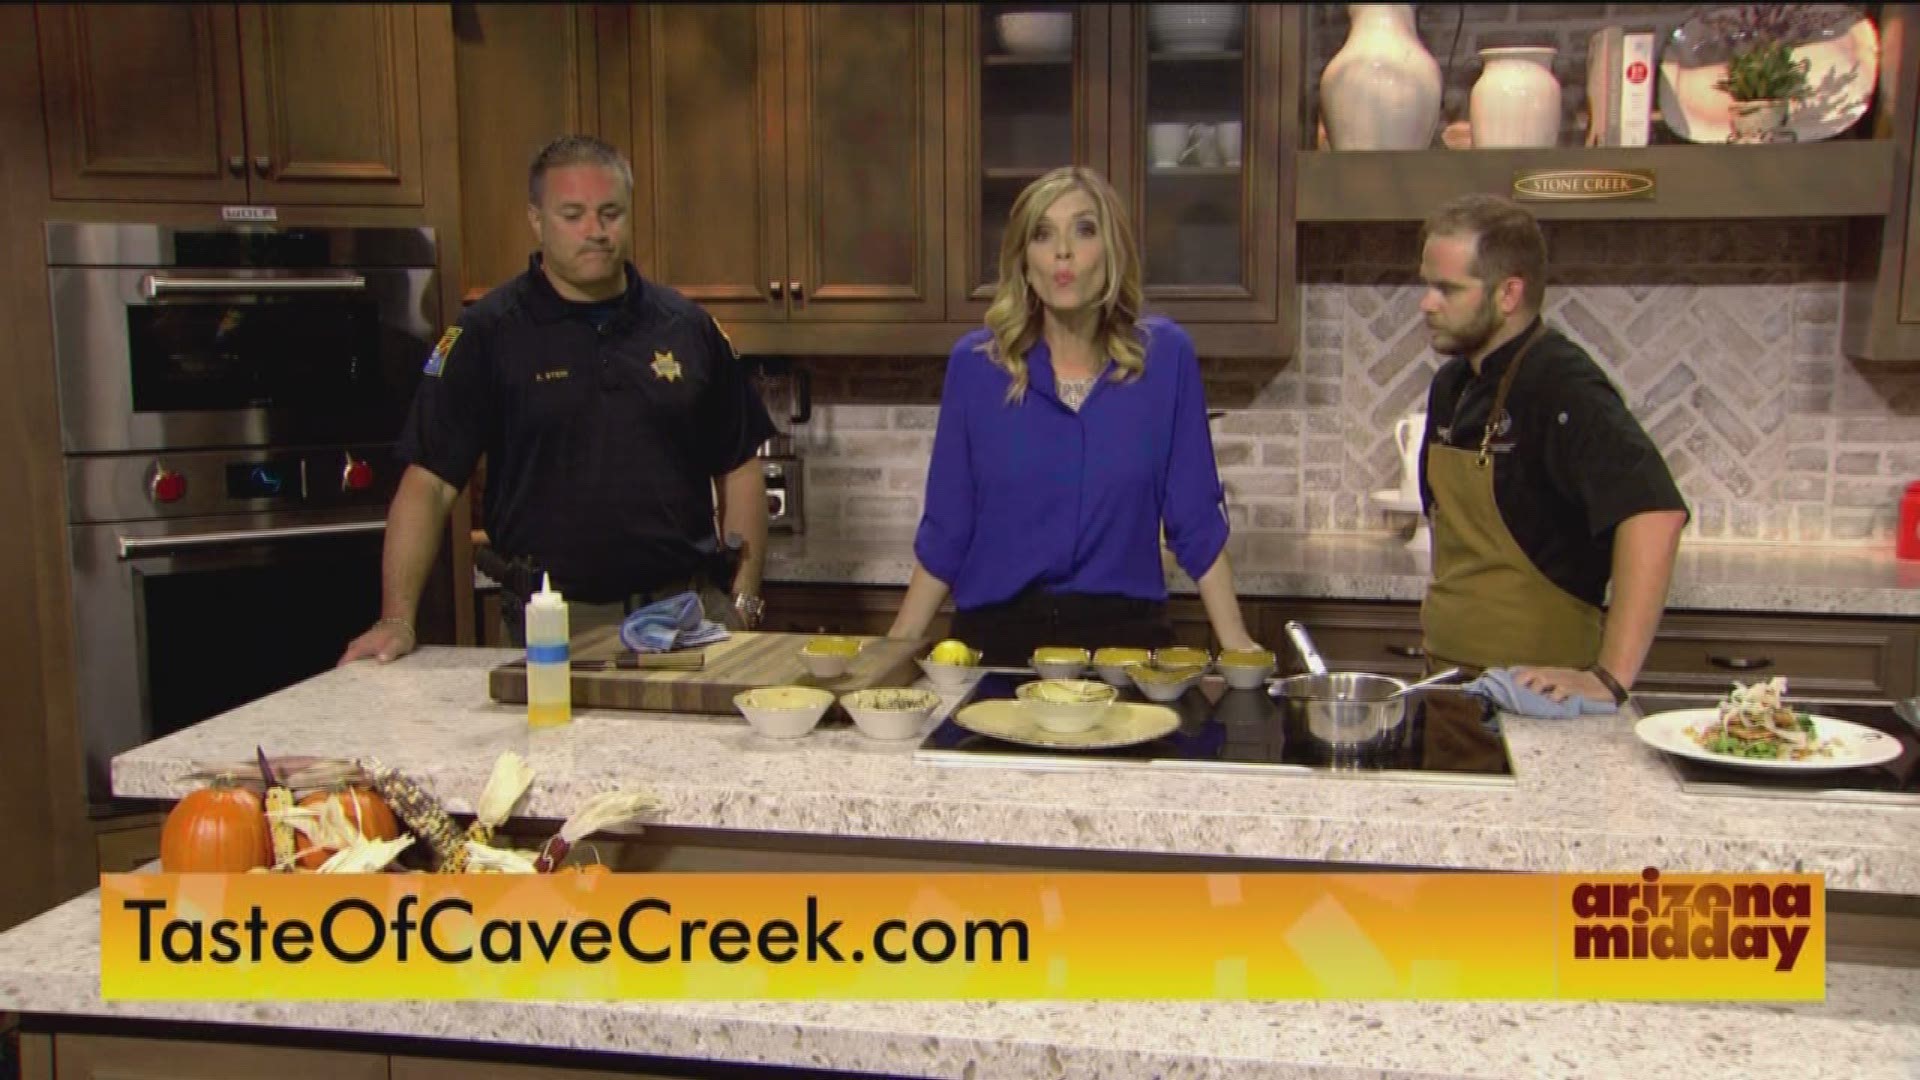 The town of Cave Creek will host its premiere event on Oct. 18-19 and will feature great food and drinks.